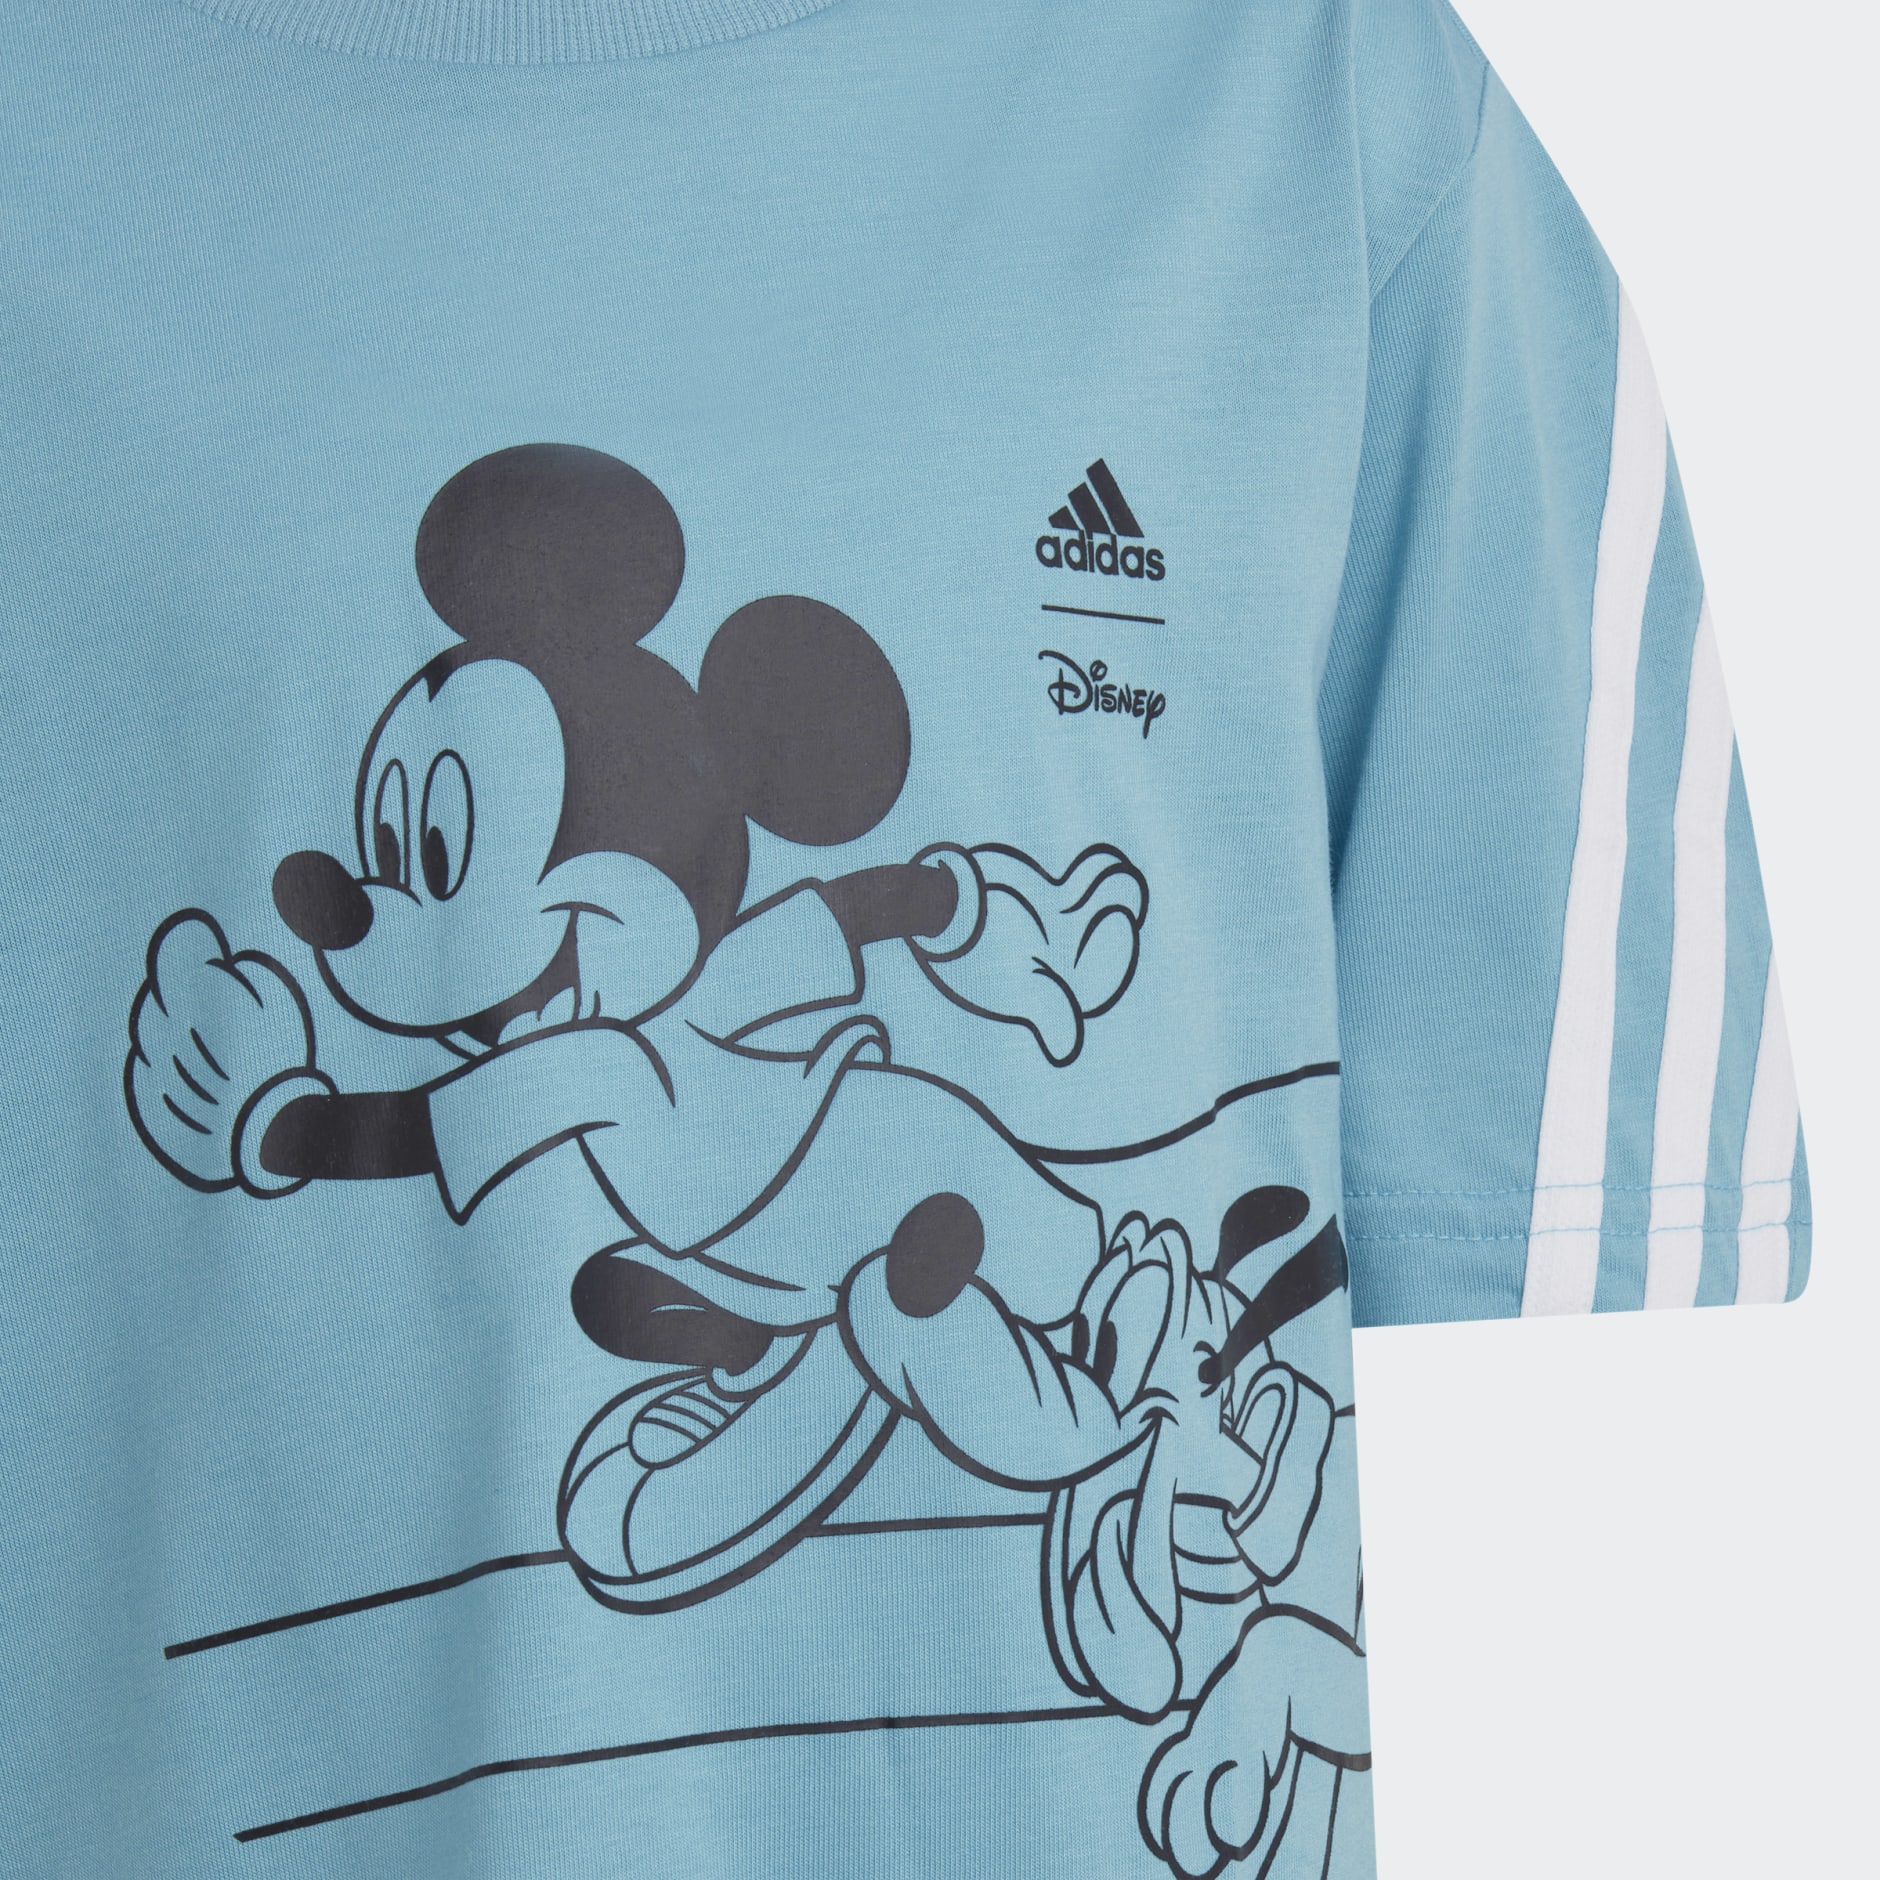 Good looking mickey mouse wearing a real madrid football kit